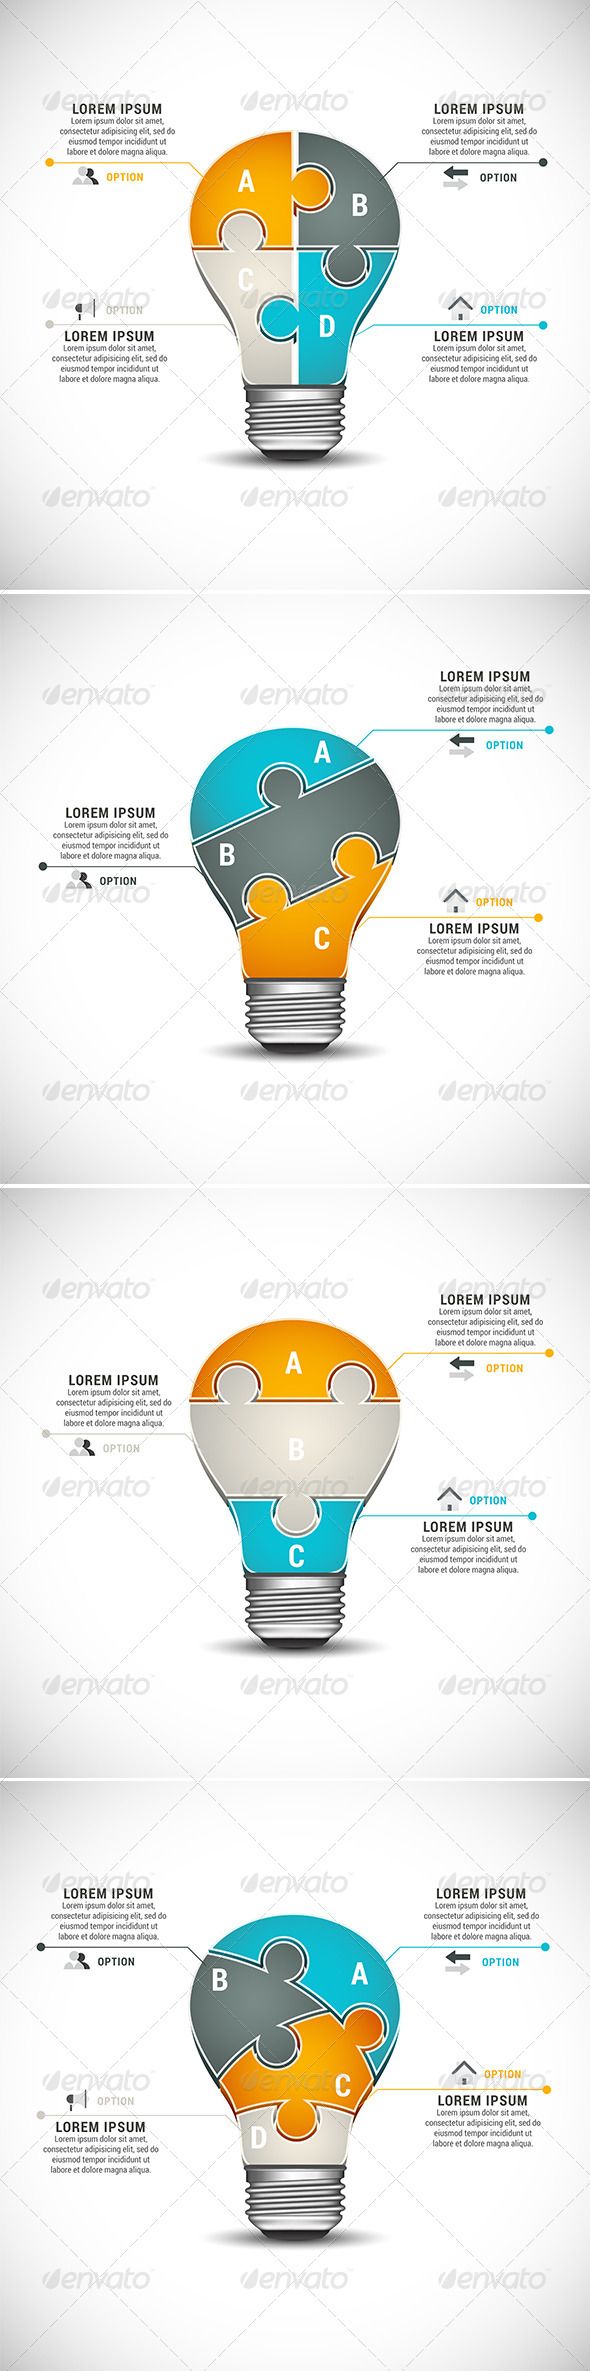 1564270883_925_Advertising-Infographics-4-Business-Infographics-Tempalte-design-Download-graphicriver.net Advertising Infographics : 4 Business Infographics Tempalte #design Download: graphicriver.net/...